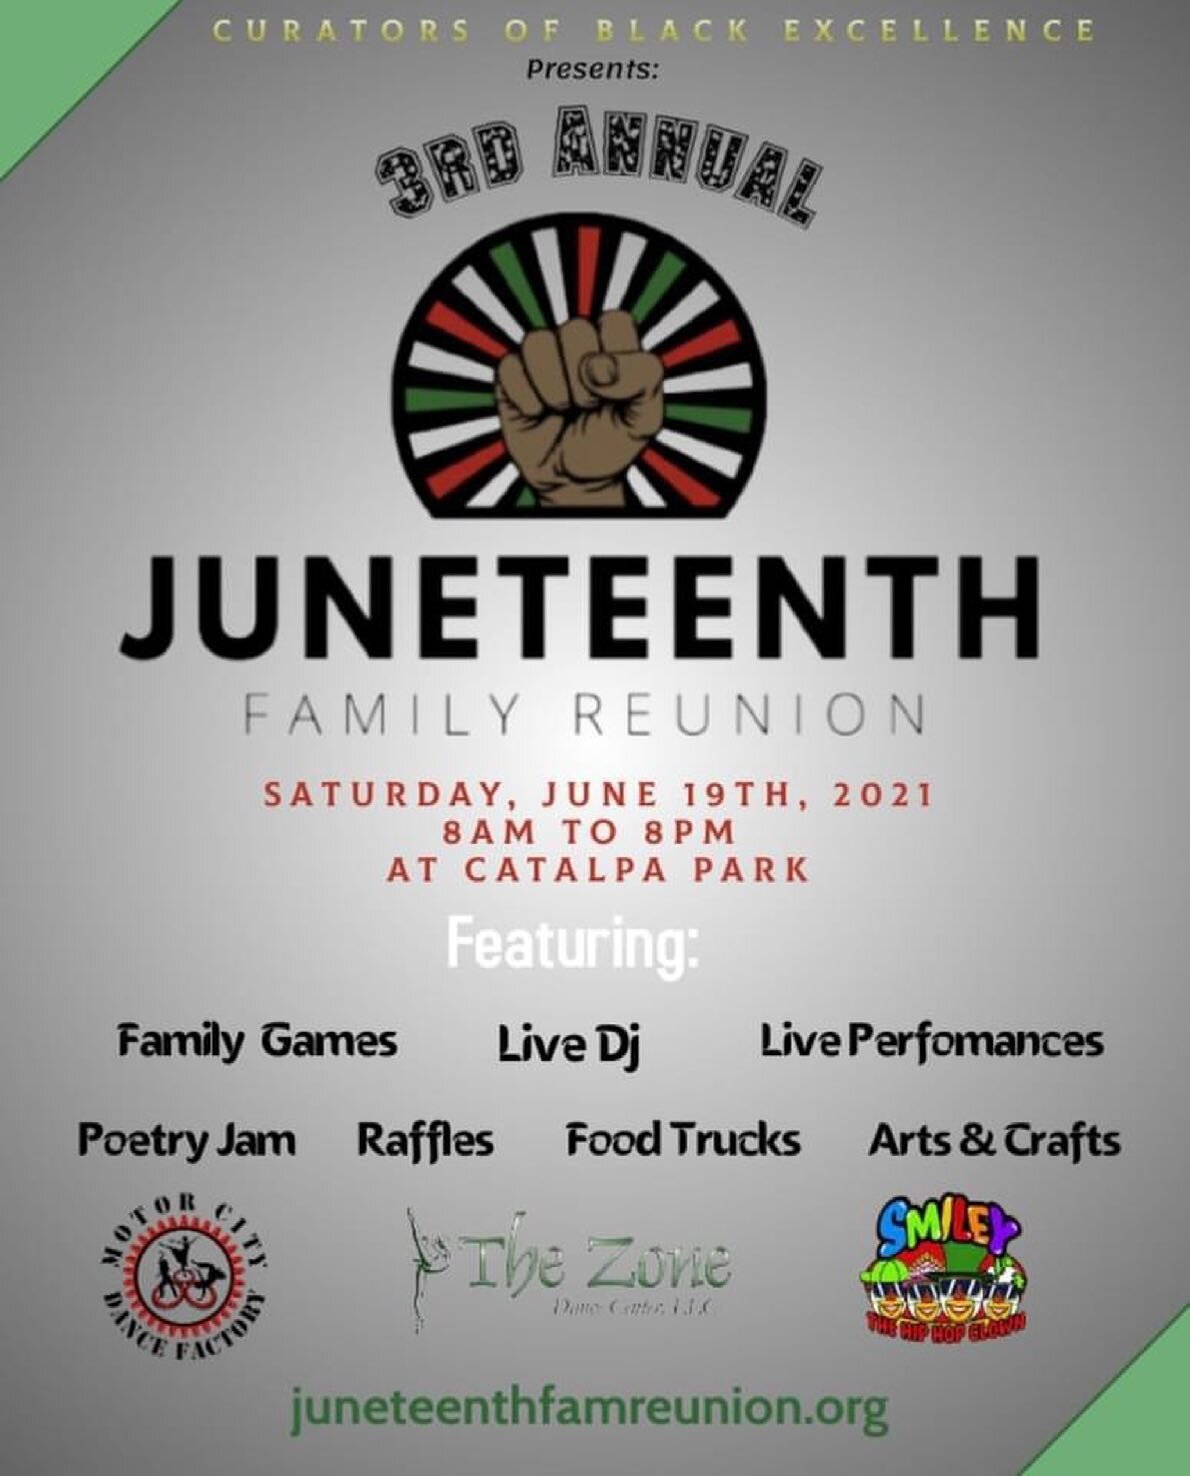 This years's Entertainment will be nothing but the best!! Thank you to @motorcitydancefactory ,@thezonedancecenterllc and @smileythehiphopclown for joining in on the celebration!!!! 

#Juneteenth #JuneteenthFamilyReunion #SavetheDate #JuneteenthCeleb